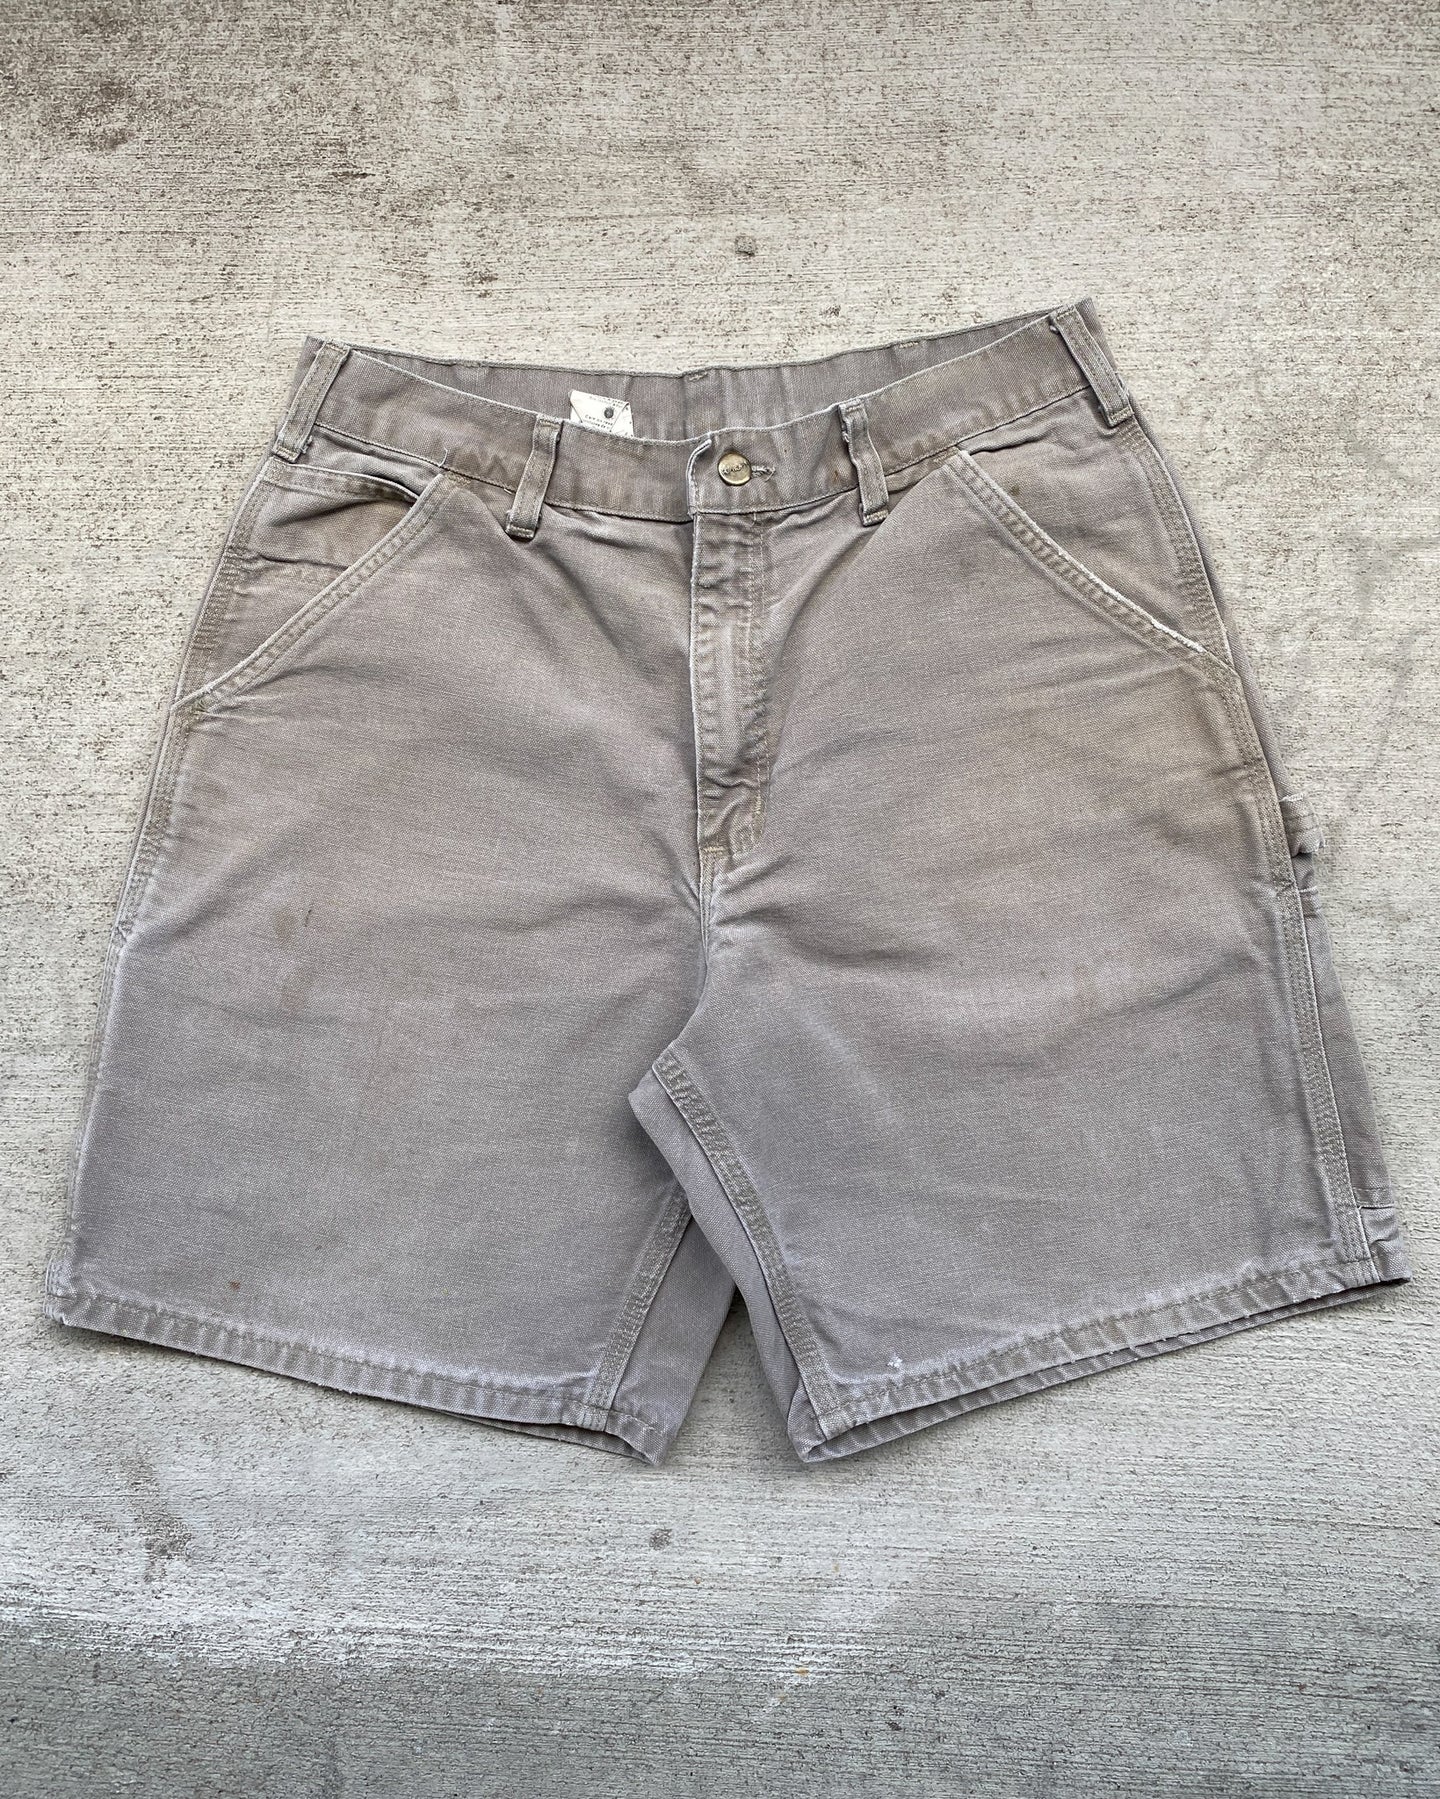 1990s Carhartt Taupe Canvas Work Shorts - Size 32